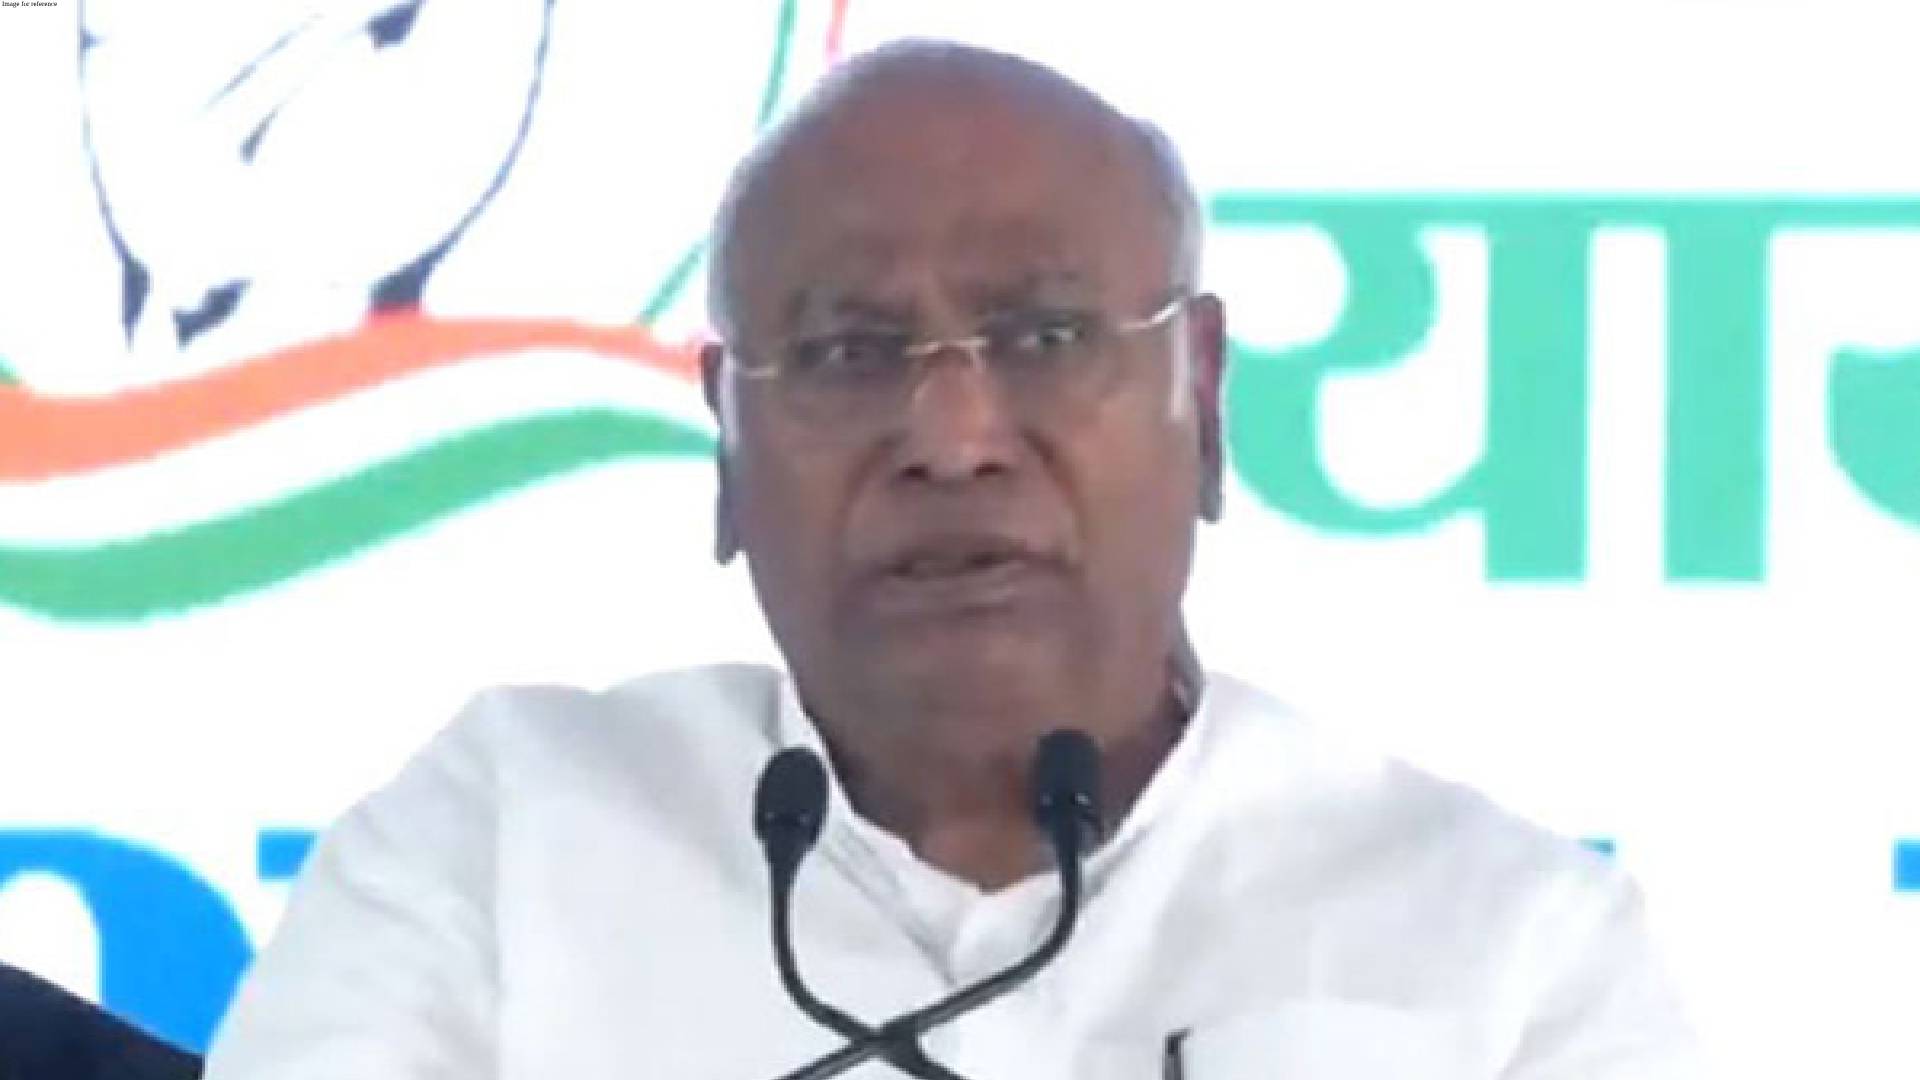 Biggest issue in Lok Sabha elections is unemployment, imposed by BJP: Congress